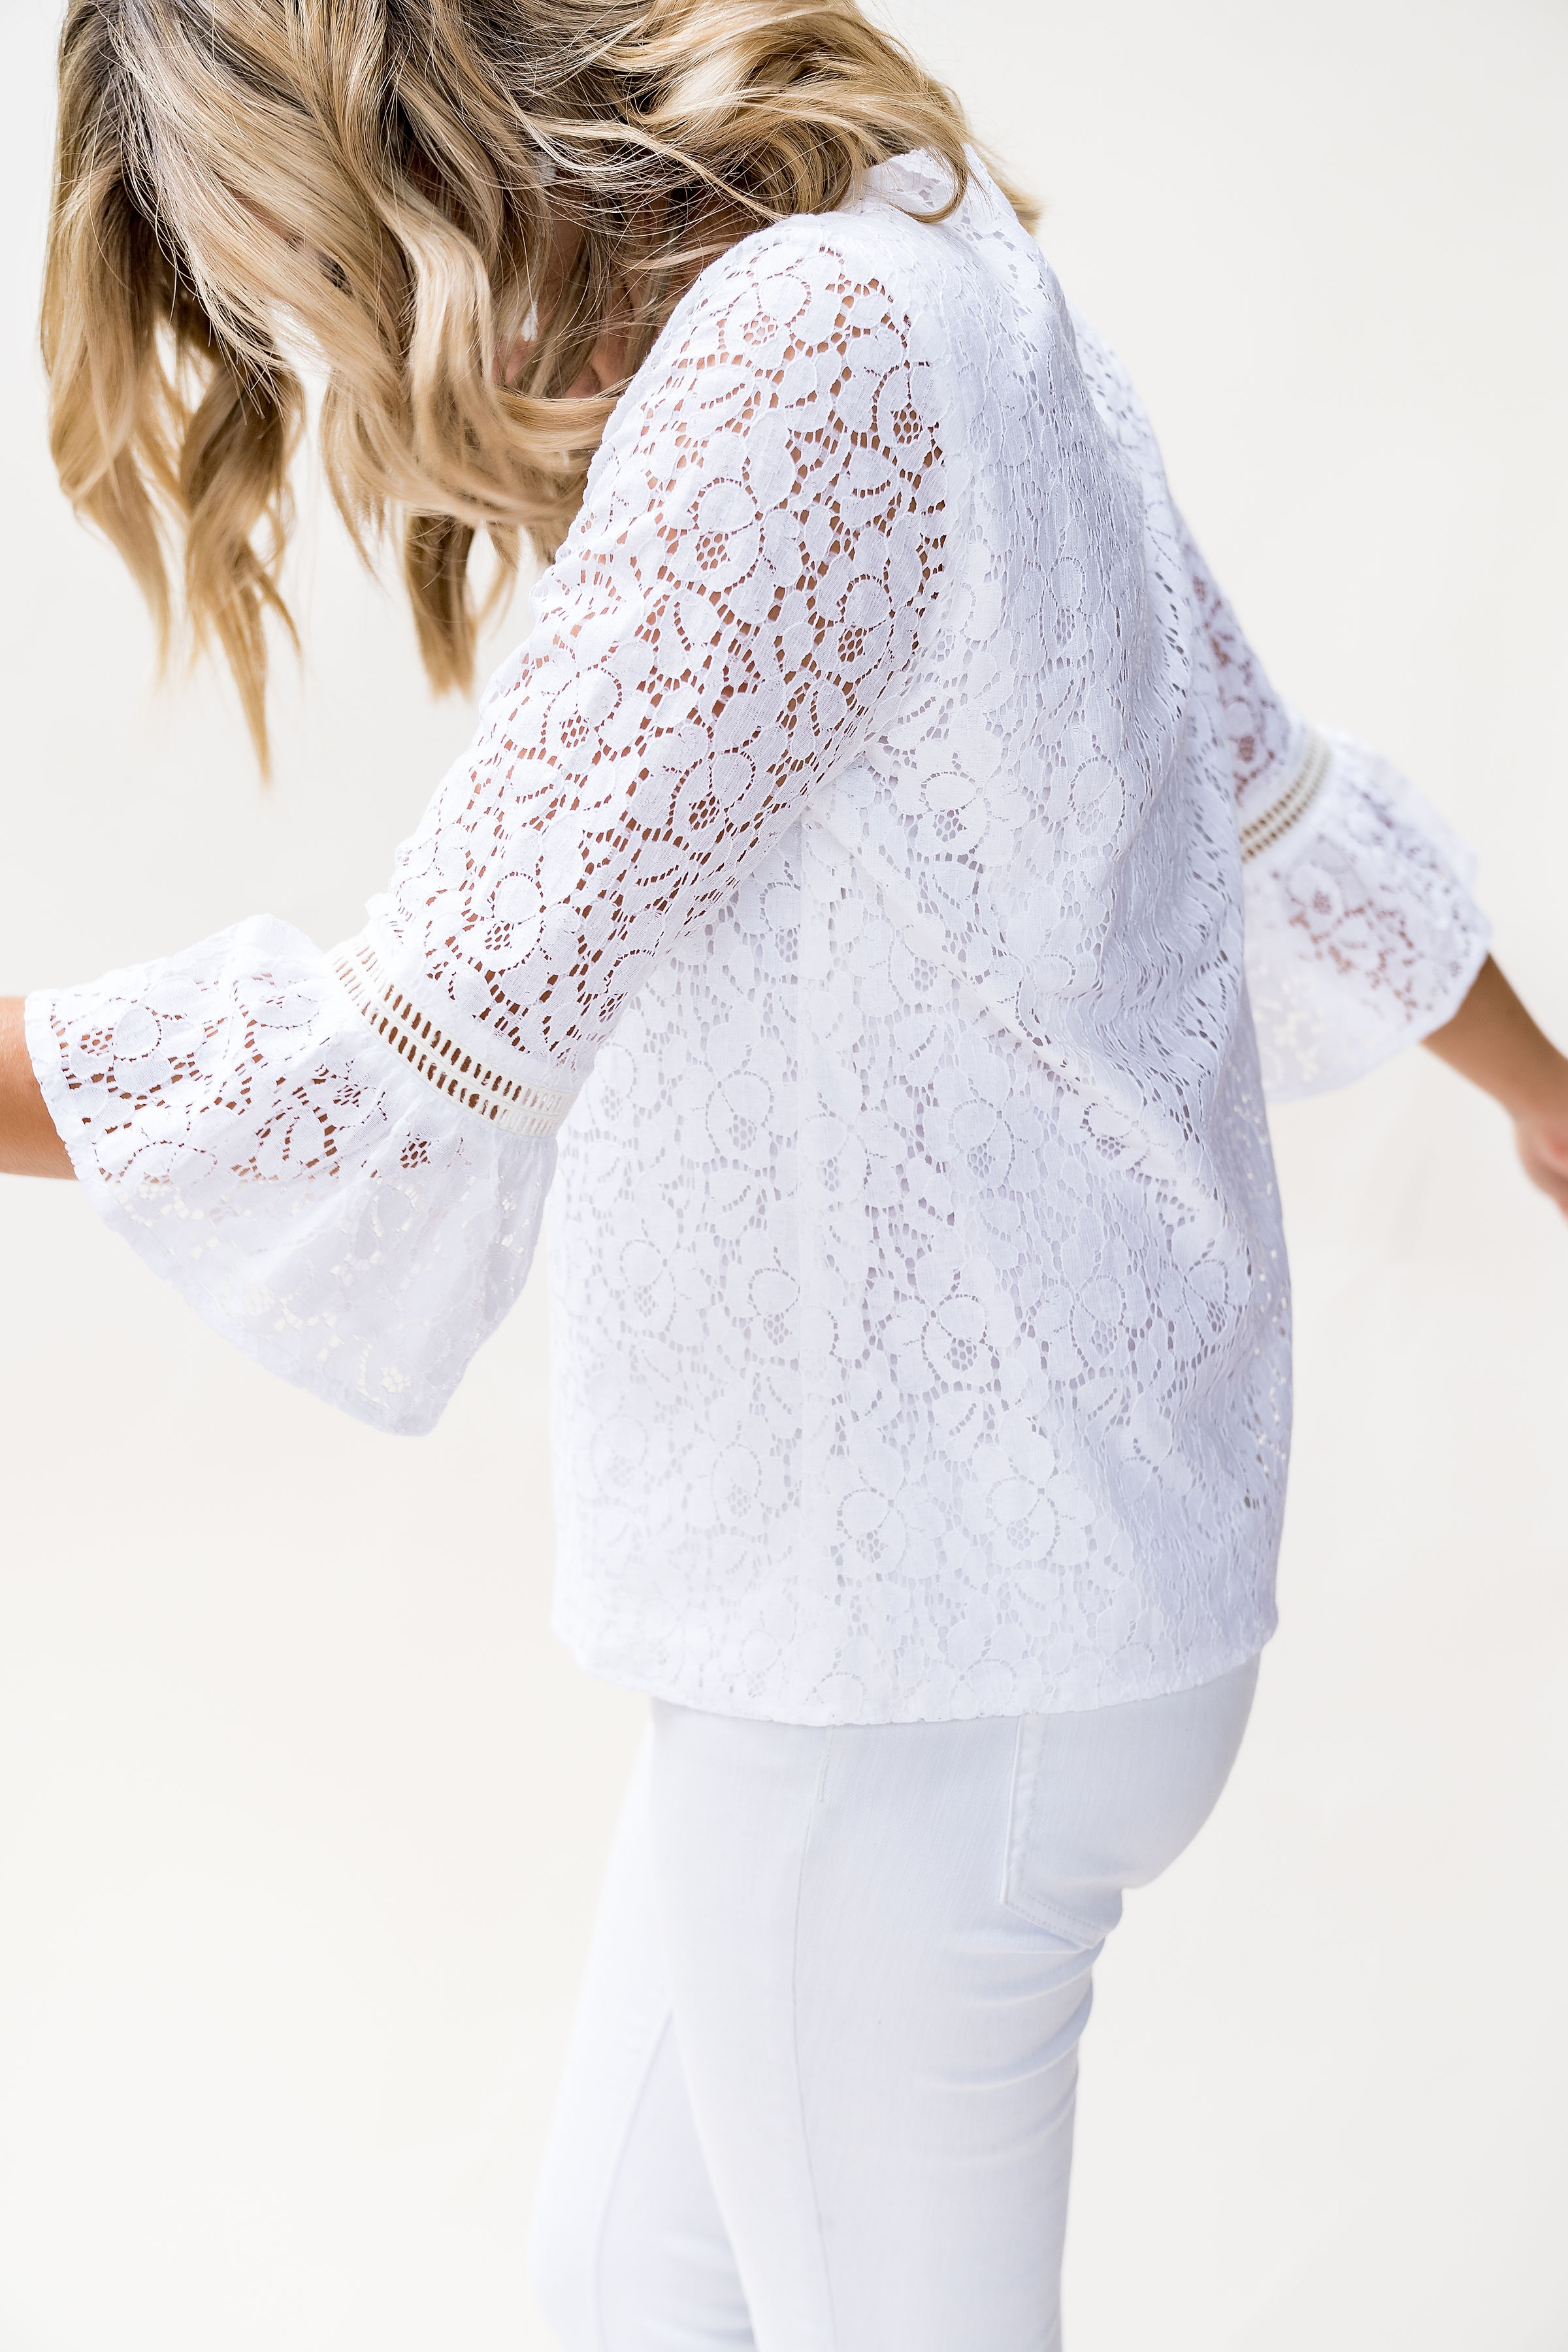 holiday outfit ideas from the gibson glam collection - the erin lace bell sleeve top in white